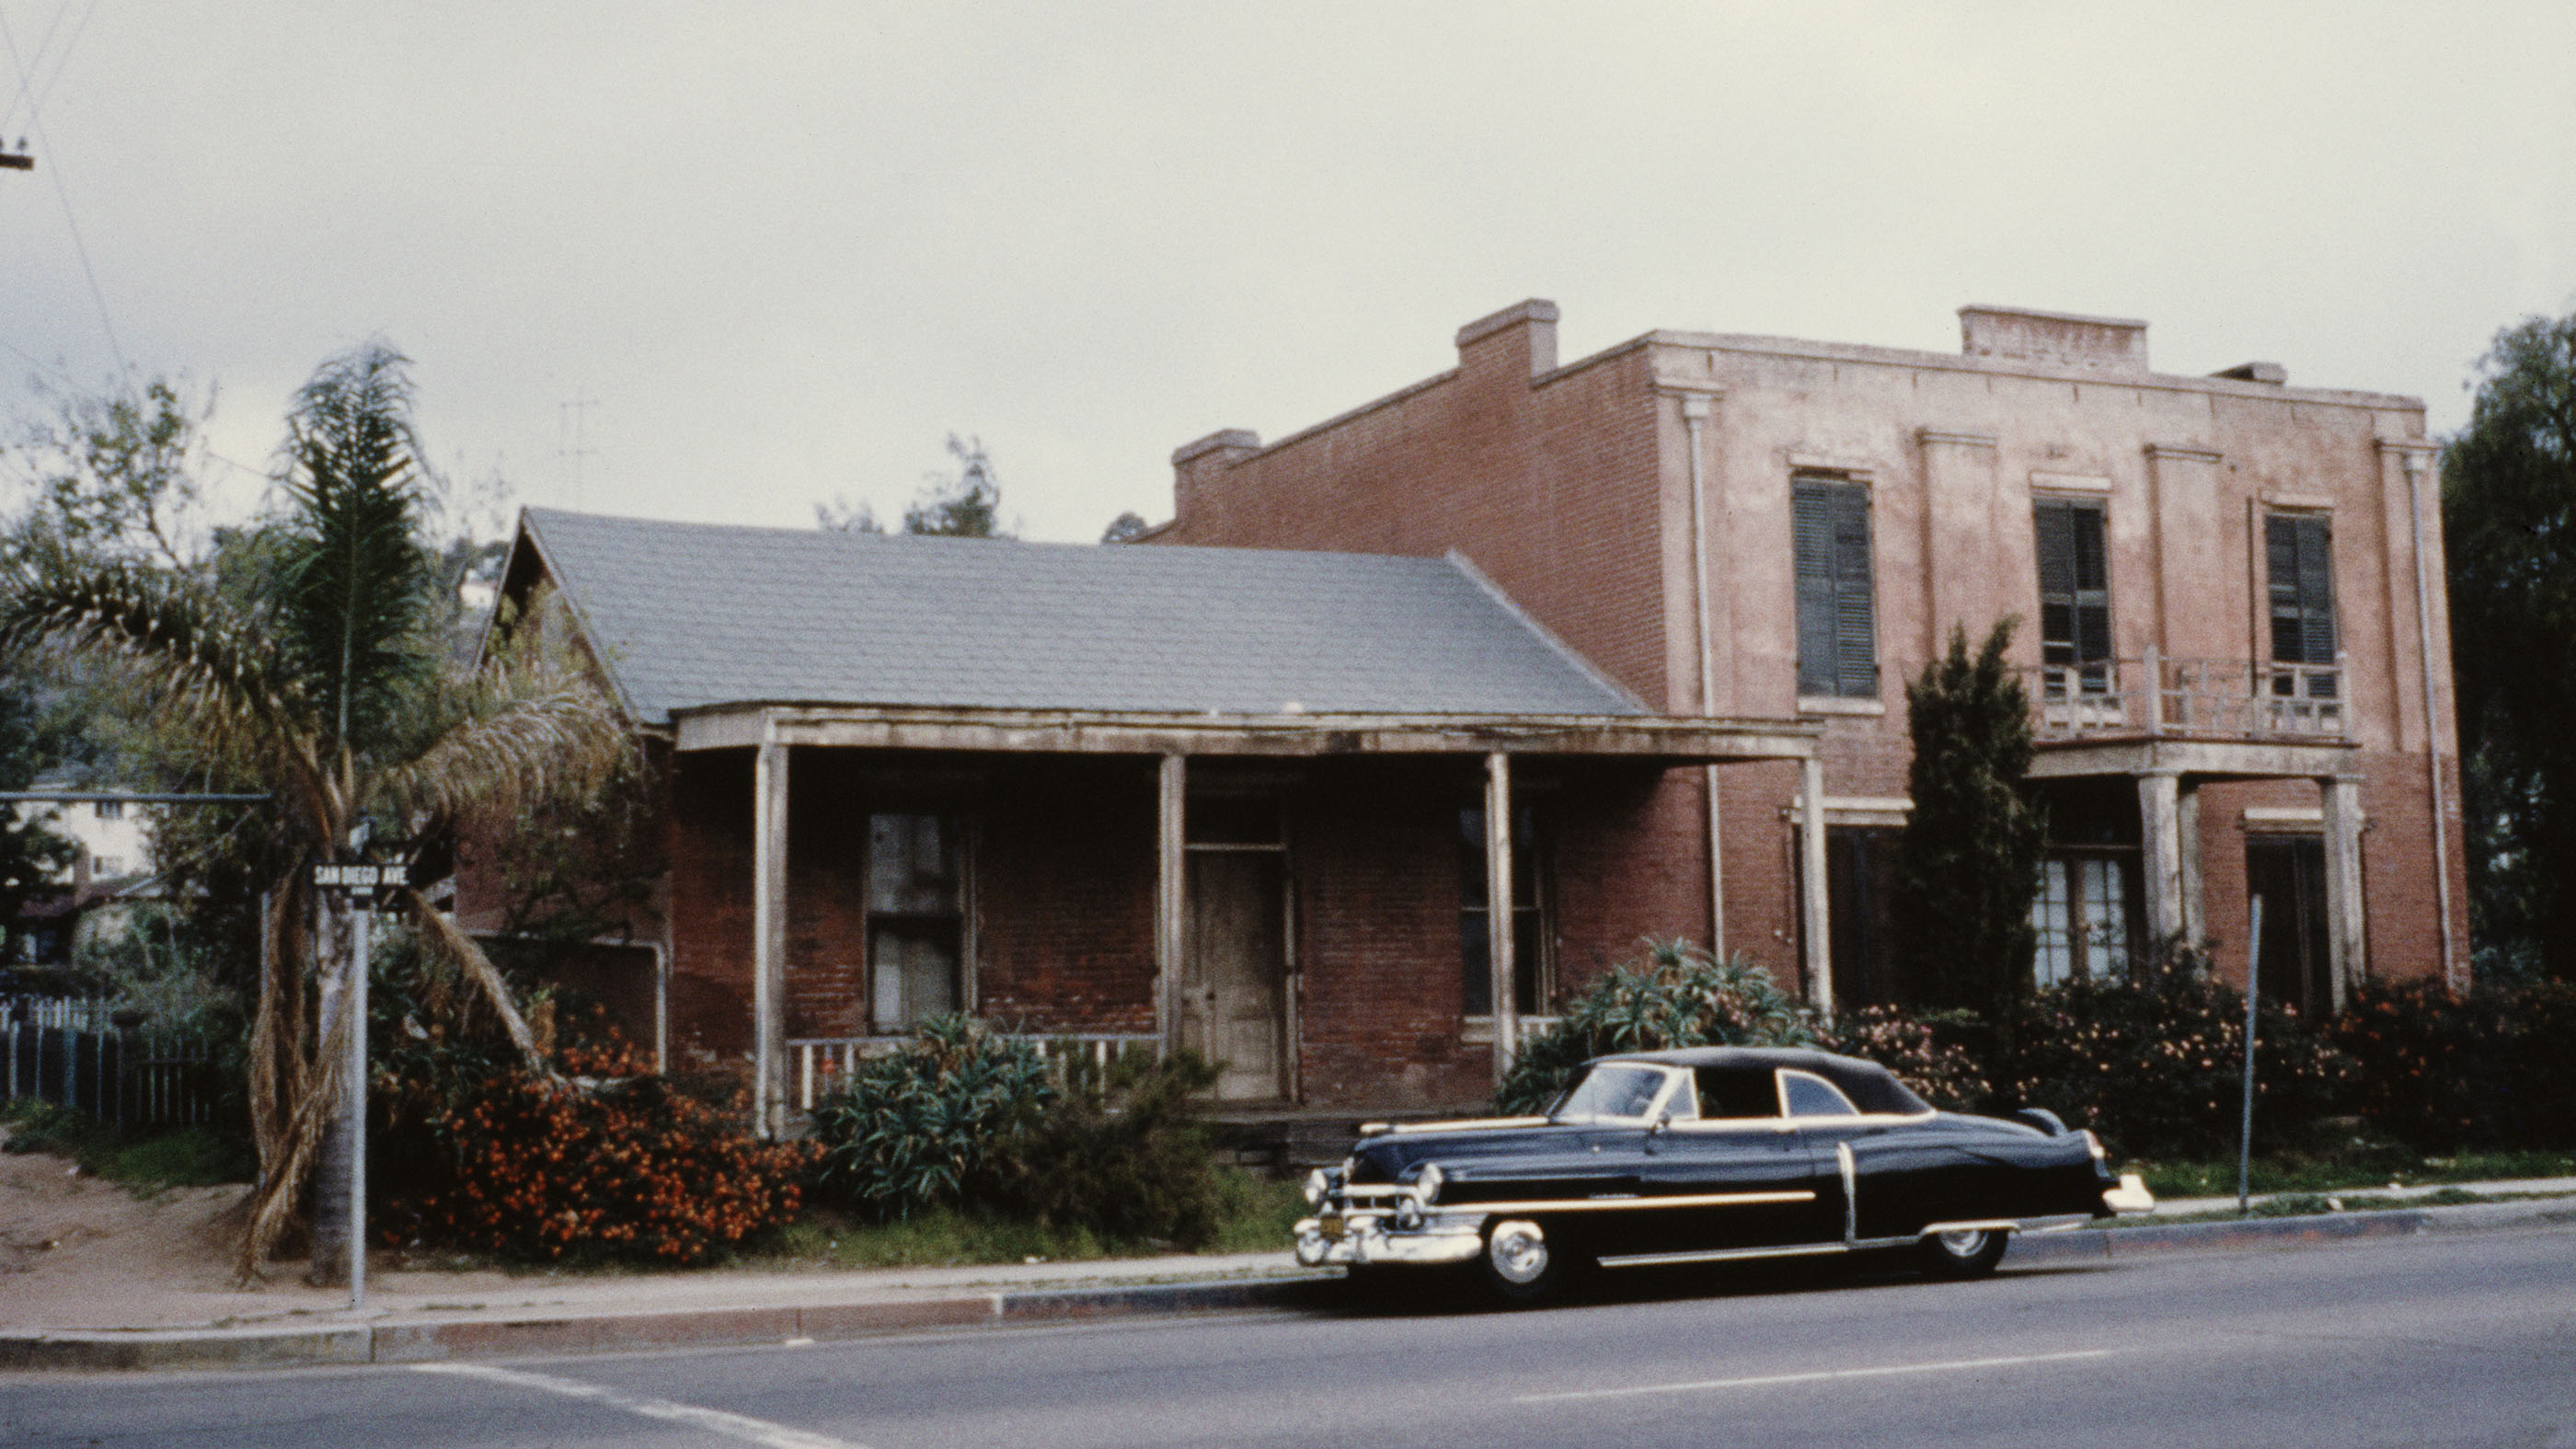 The Whaley House in the Old Town of San Diego, California, circa 1965. It was built in 1857 for the Whaley family and was designated the most haunted house in America by the television show 'America's Most Haunted'.